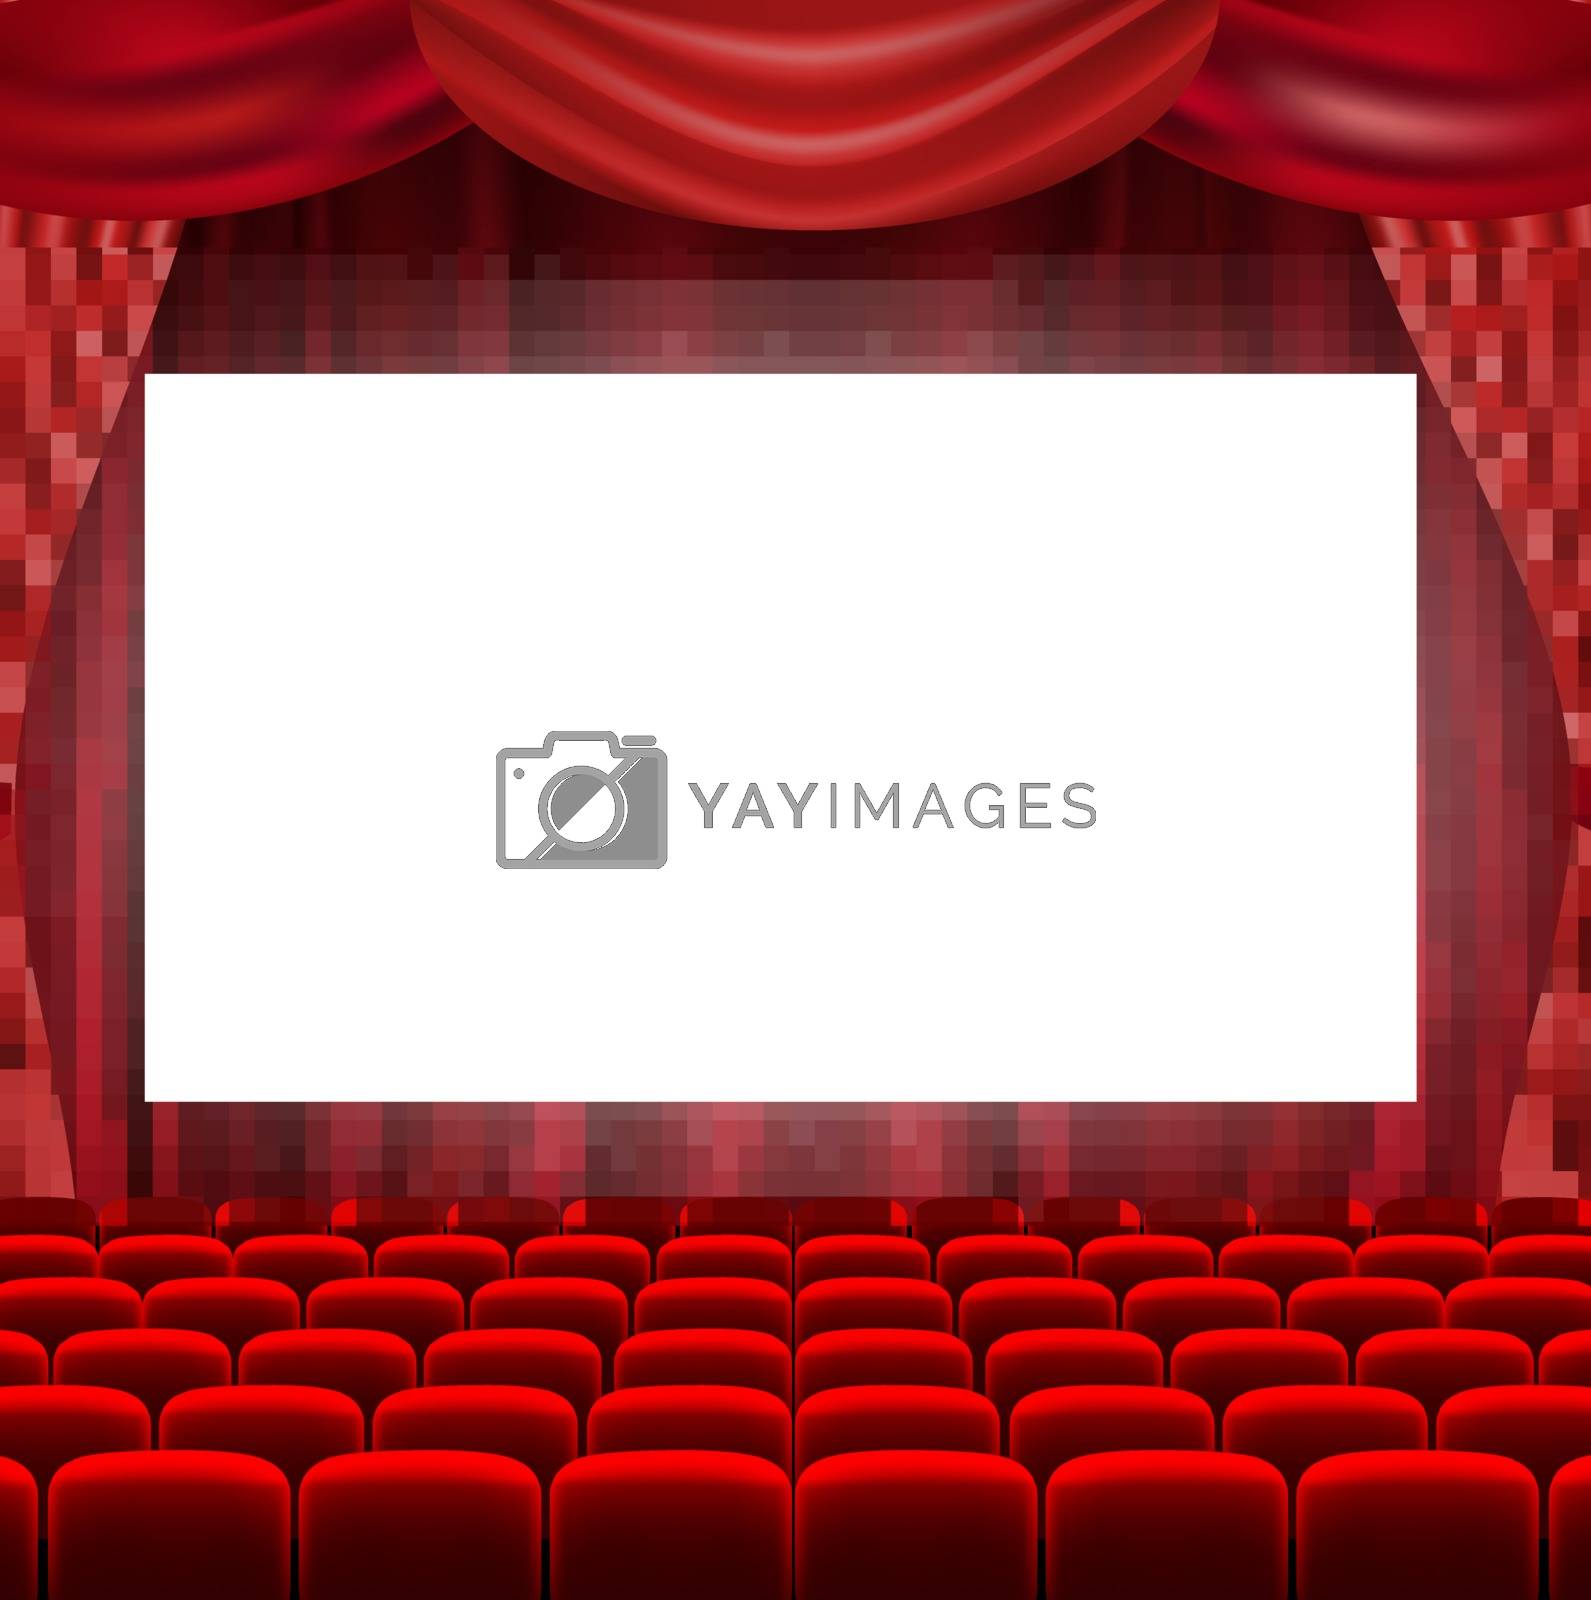 Royalty free image of Cinema Screen With Red Curtains by barbaliss